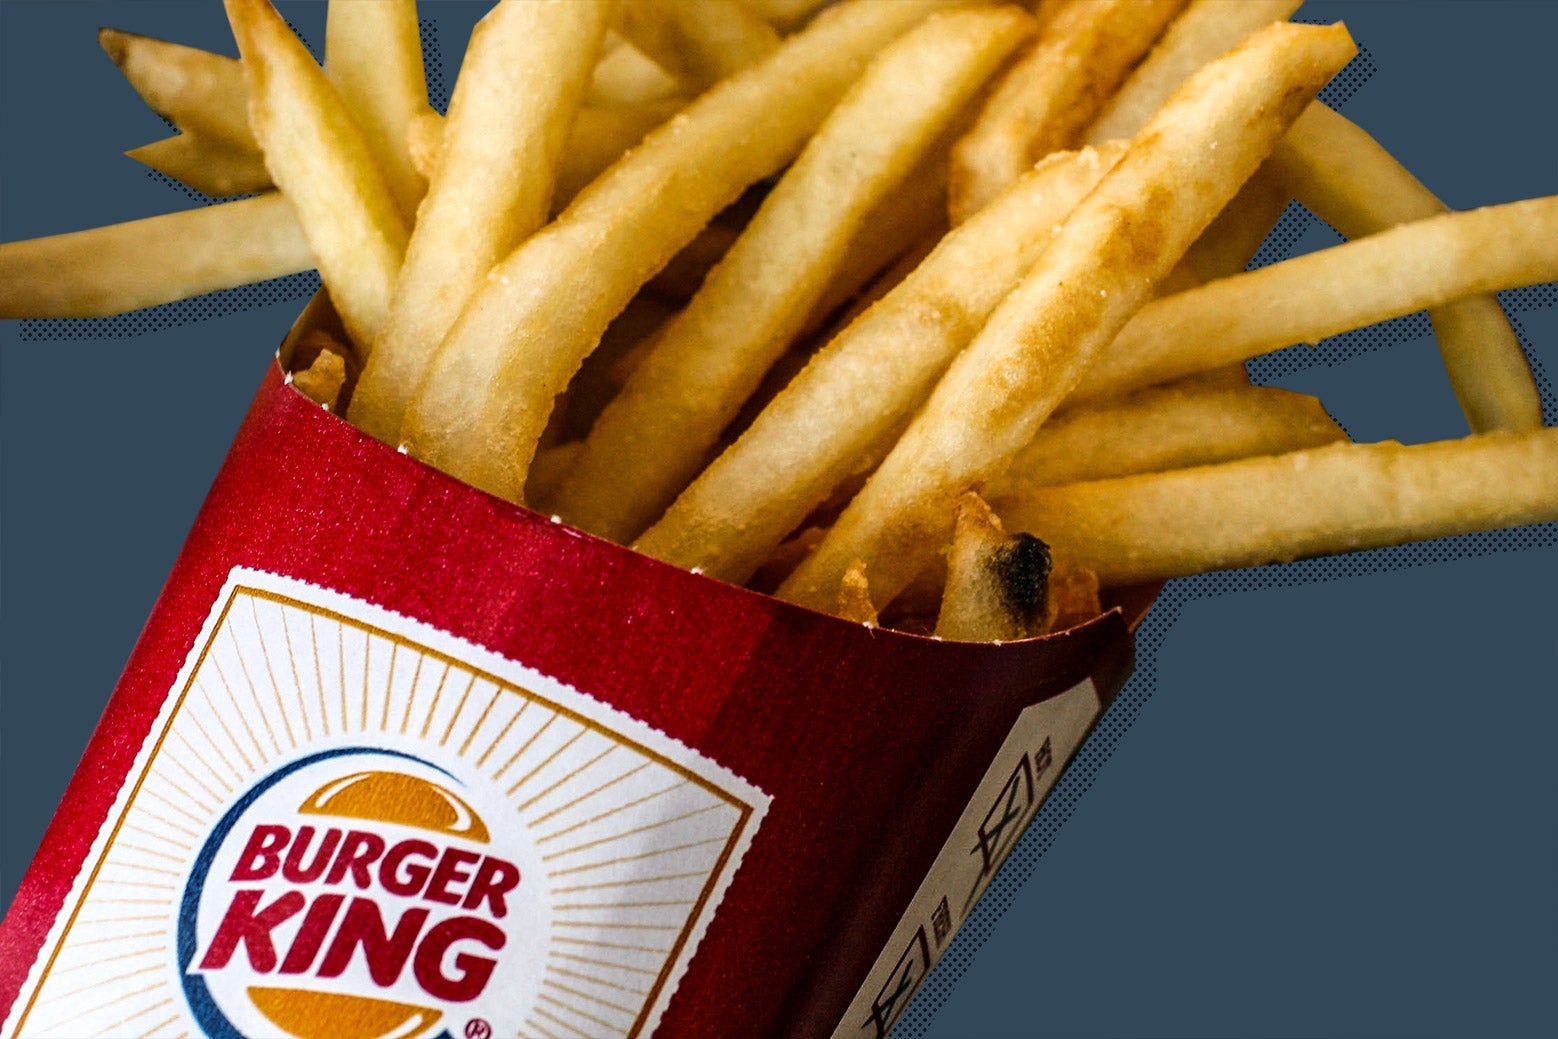 A close-up image of French fries in a red box that says Burger King.